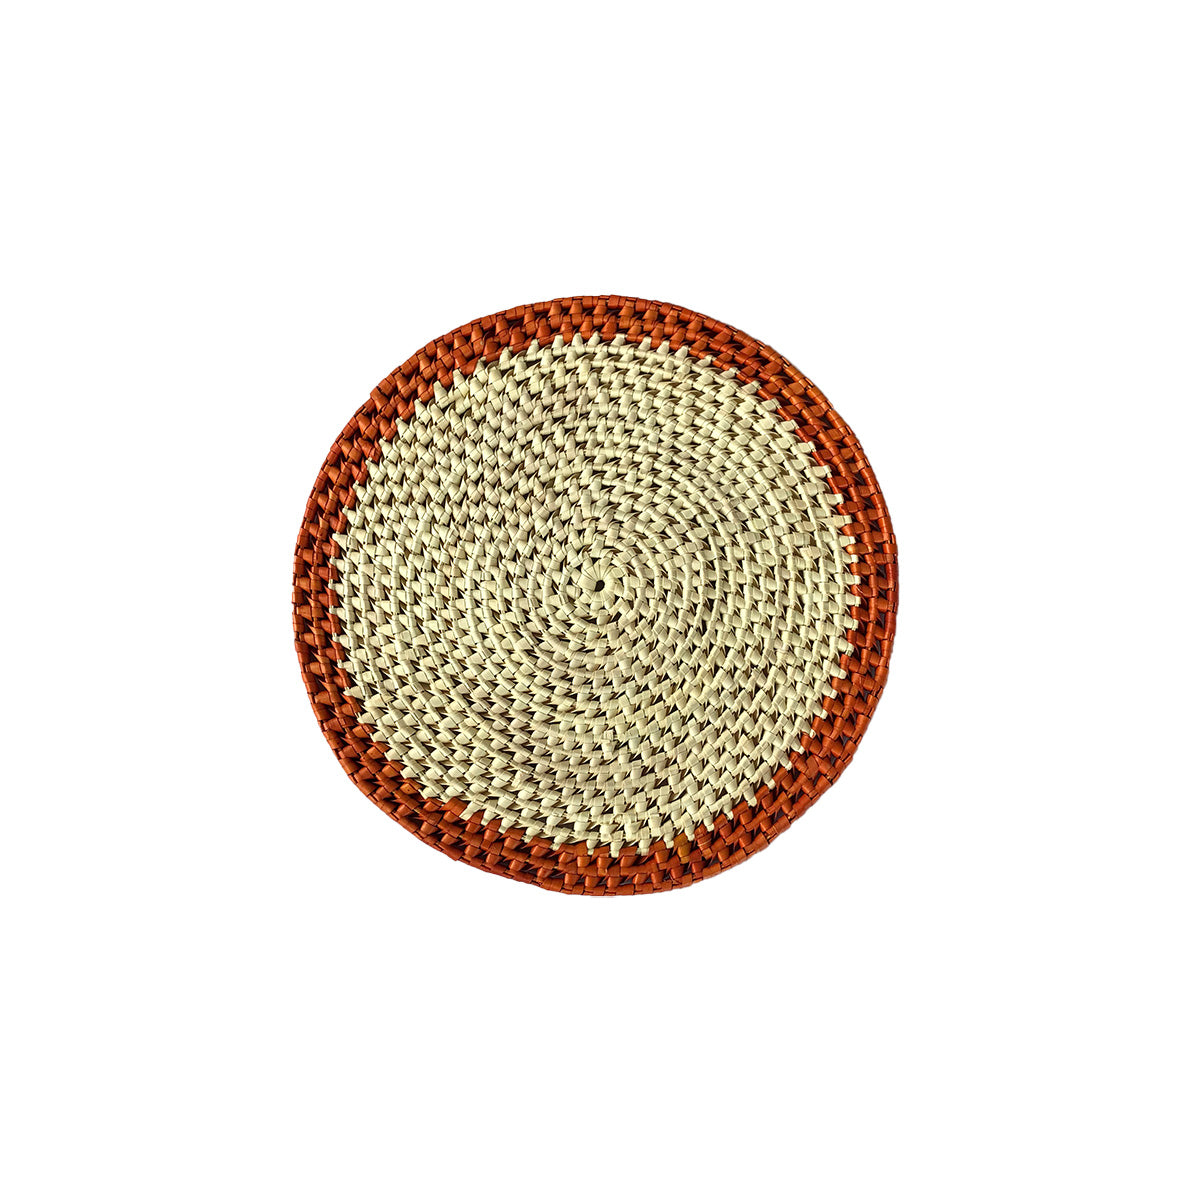 Handcrafted Palmyra Round Placemat - Natural with Orange Border